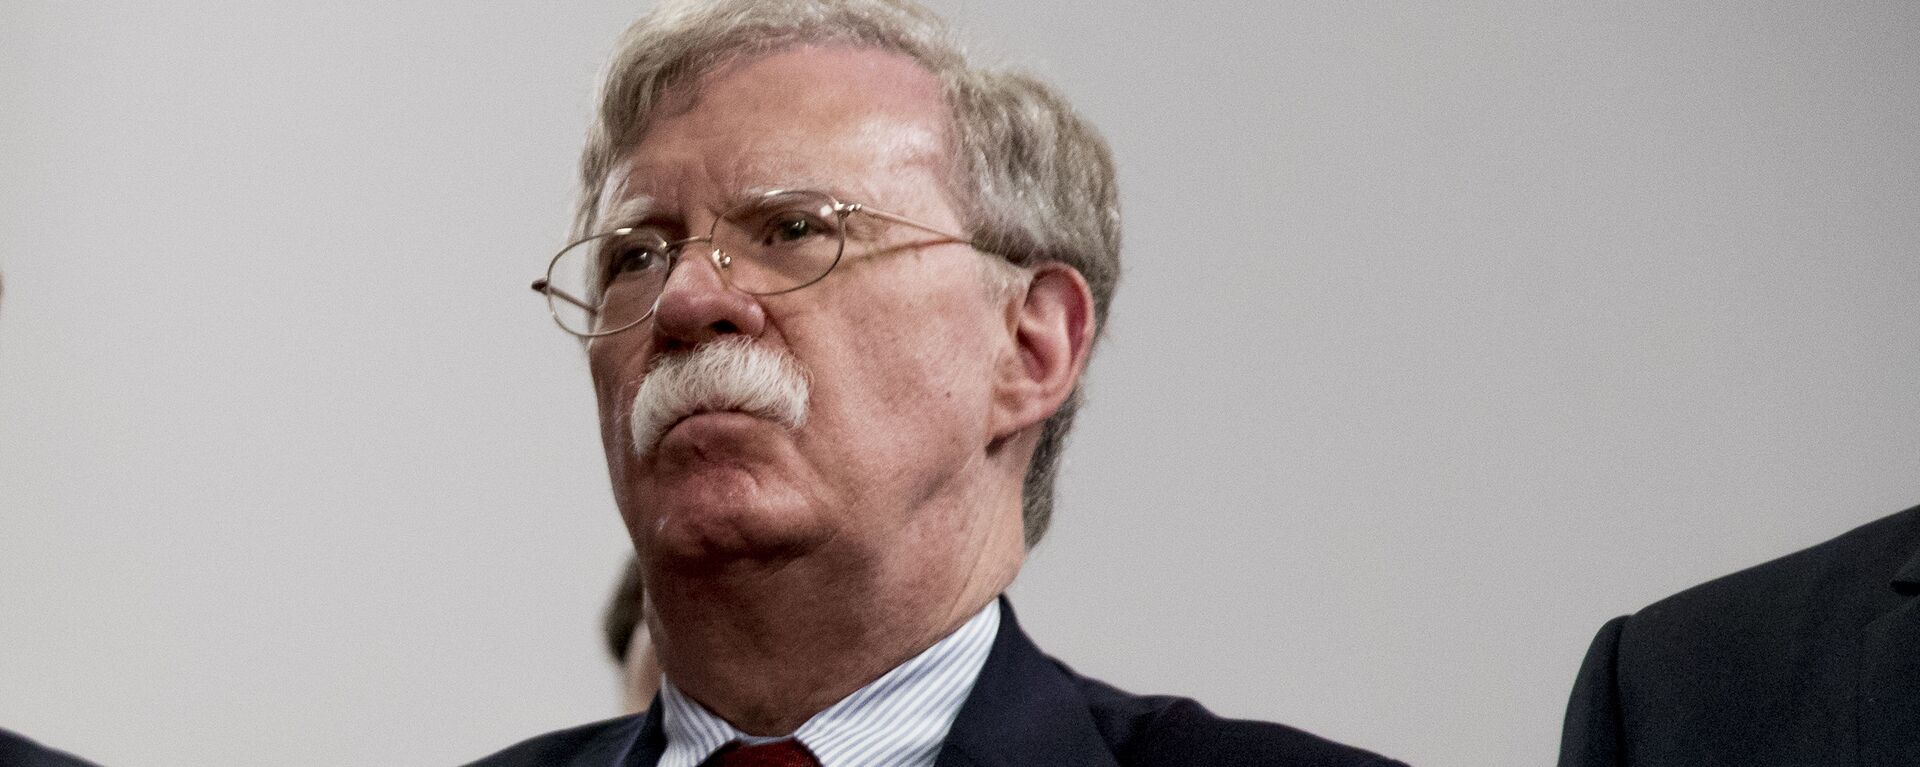 National Security Adviser John Bolton attends a meeting with President Donald Trump as he meets with Indian Prime Minister Narendra Modi at the G-7 summit in Biarritz, France, Monday, Aug. 26, 2019 - Sputnik International, 1920, 02.07.2021